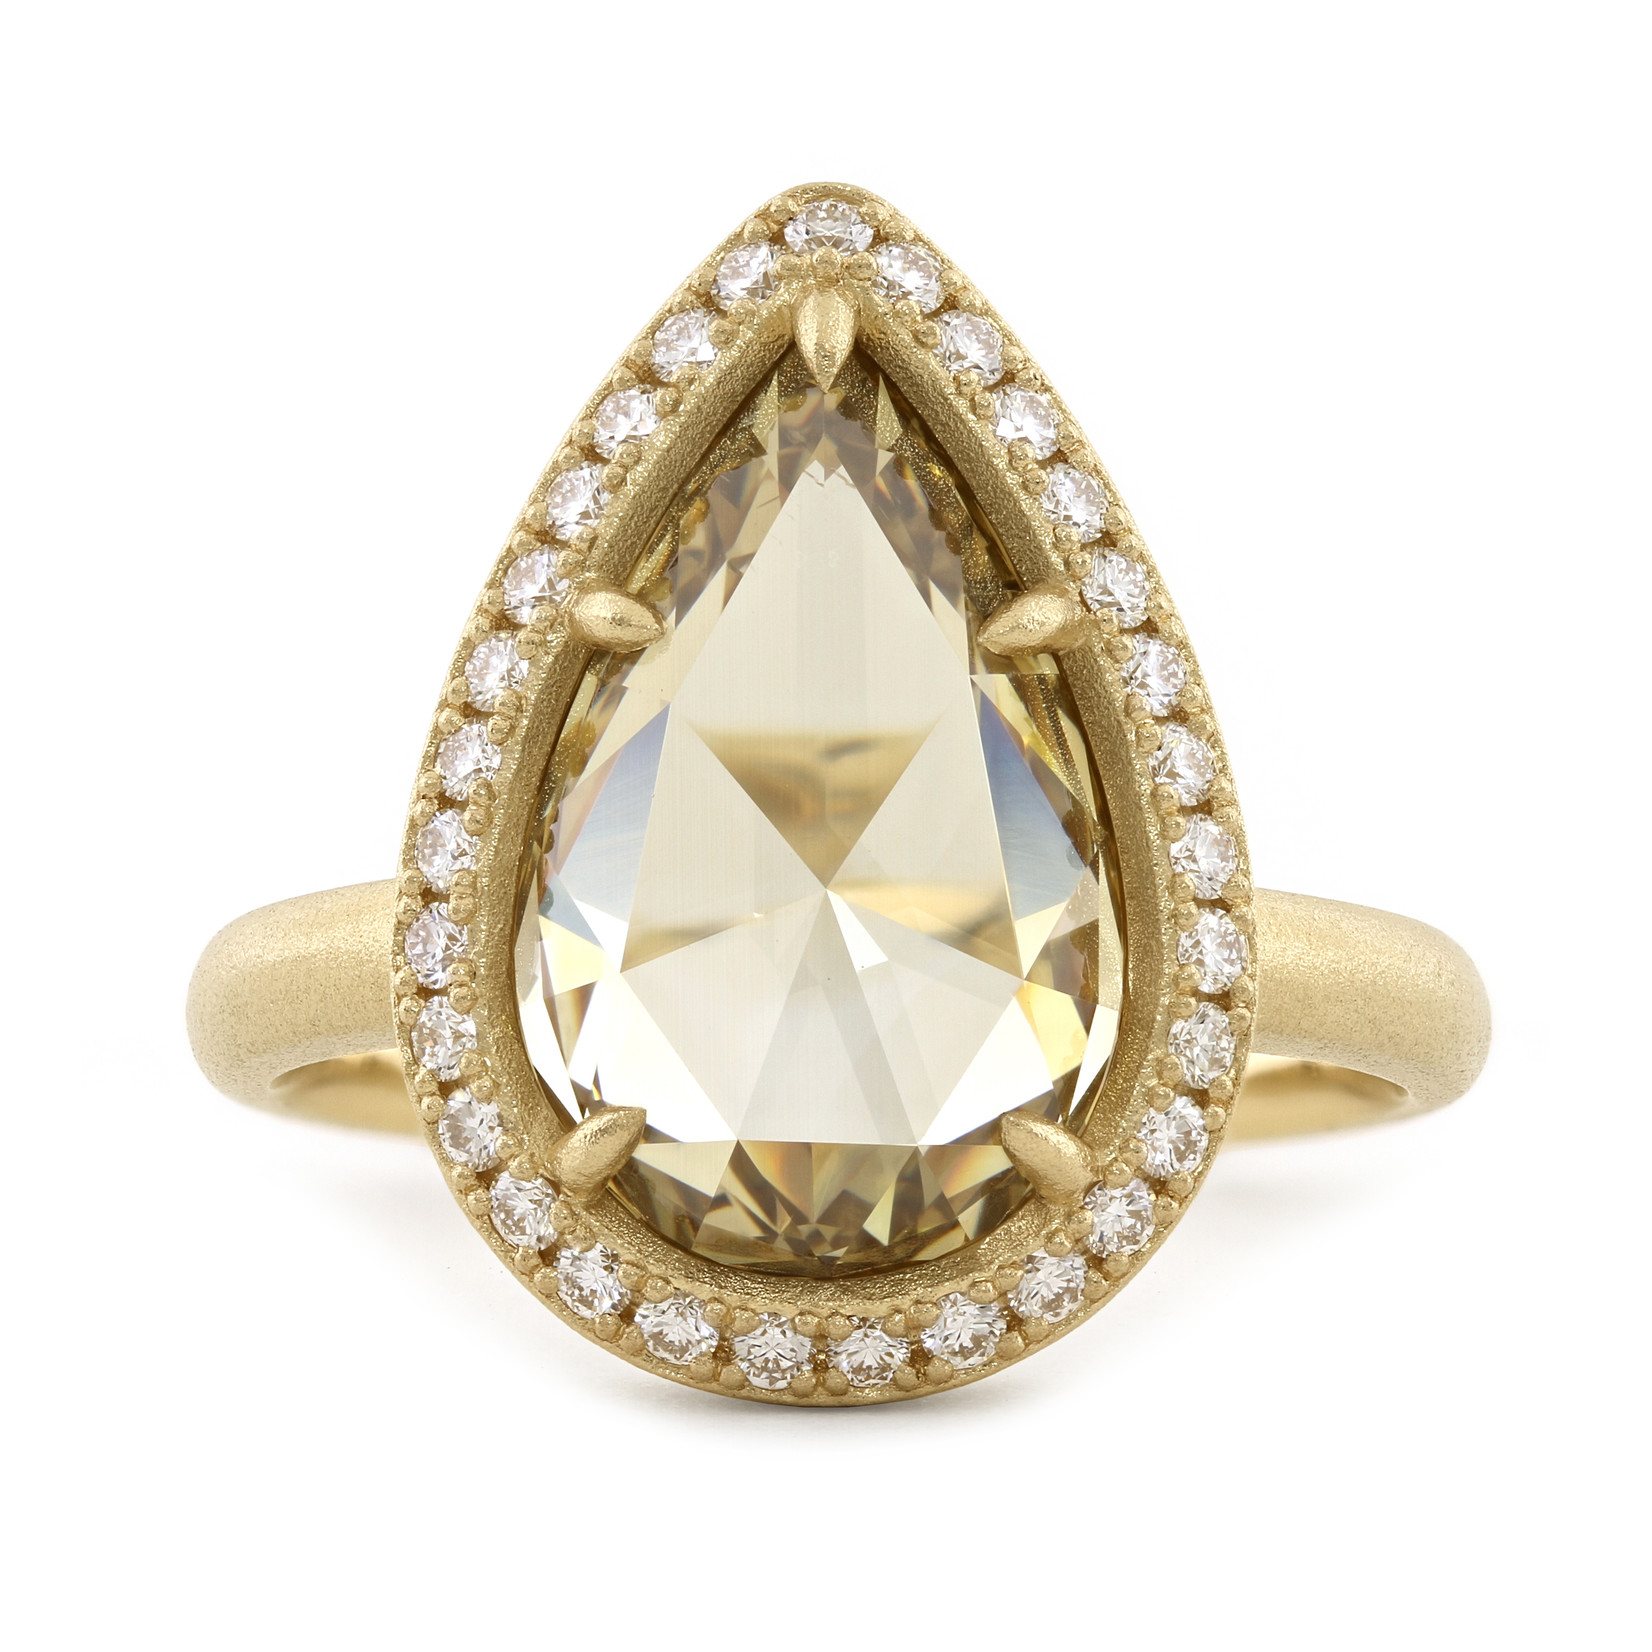 Baxter Moerman Alexis Ring with Rose Cut Champagne Diamond